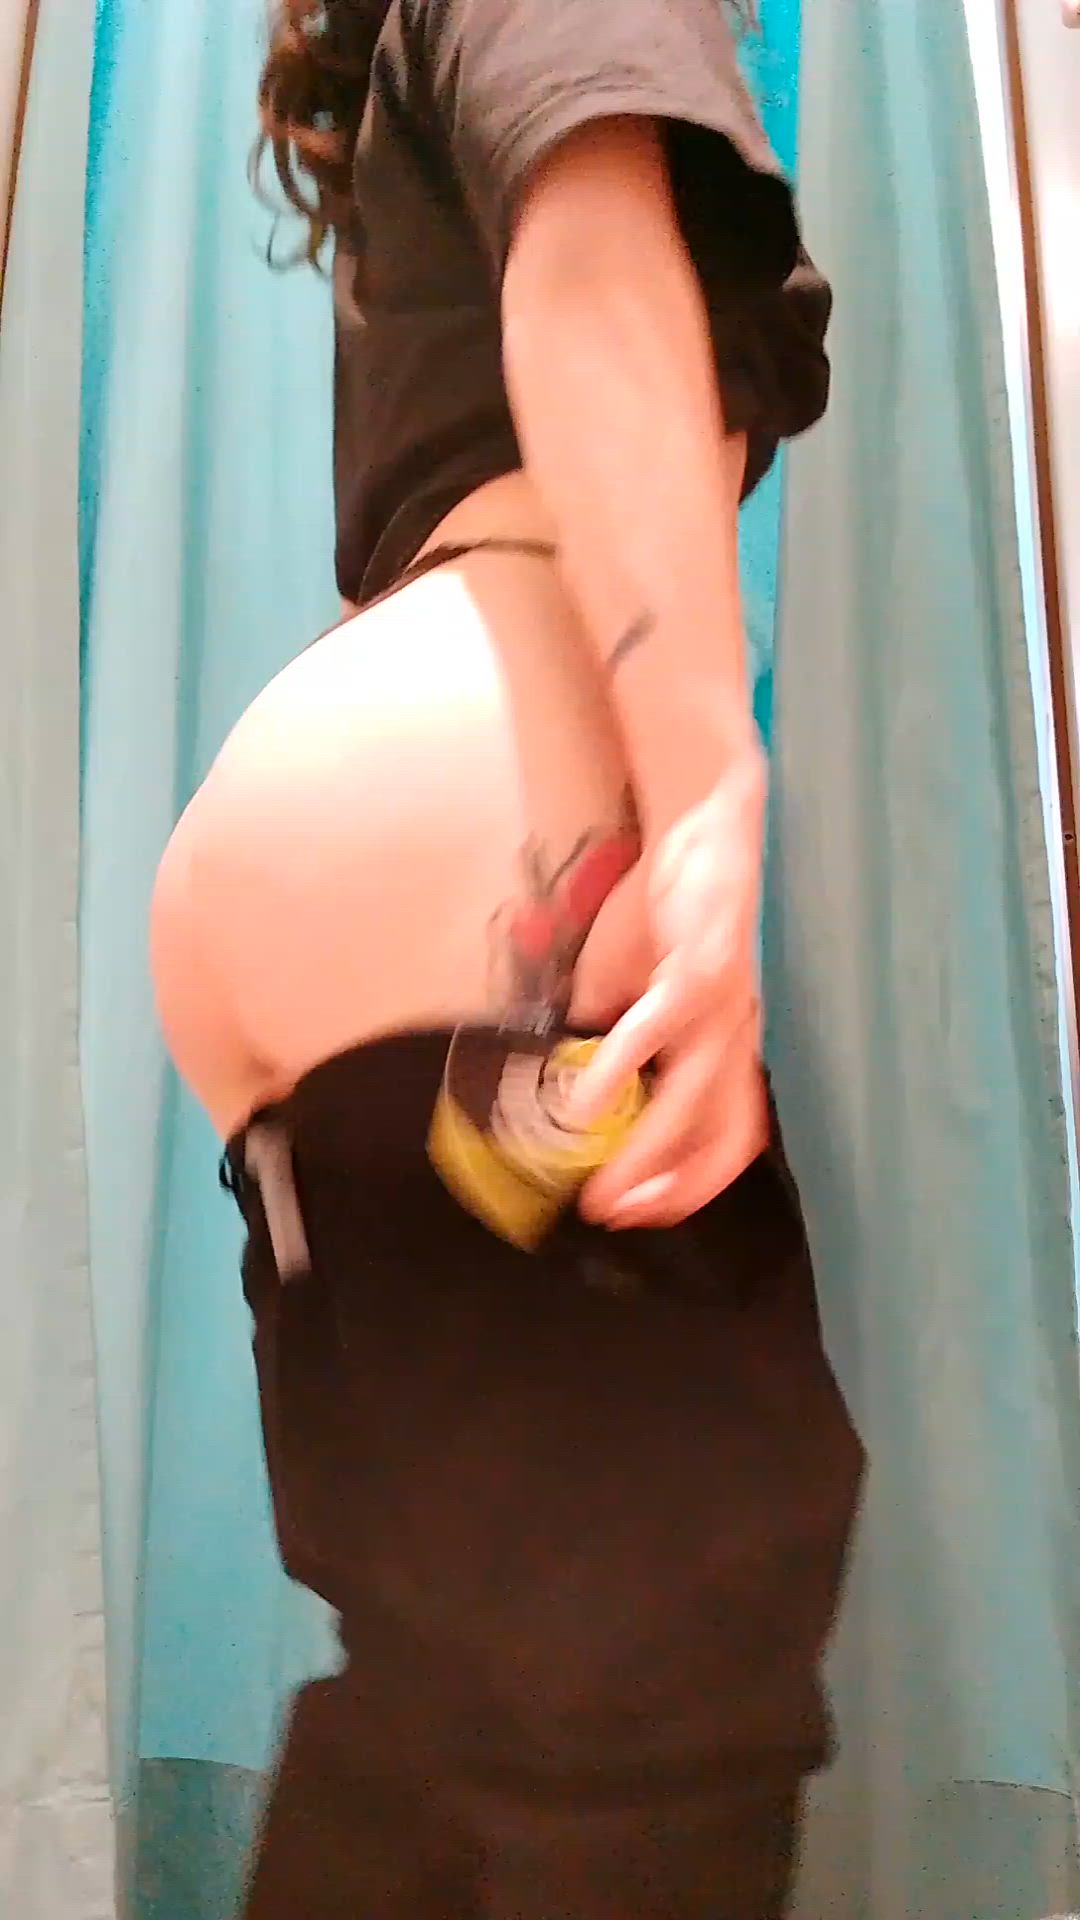 Ass porn video with onlyfans model dominatrixrose <strong>@hypnoticdolly</strong>